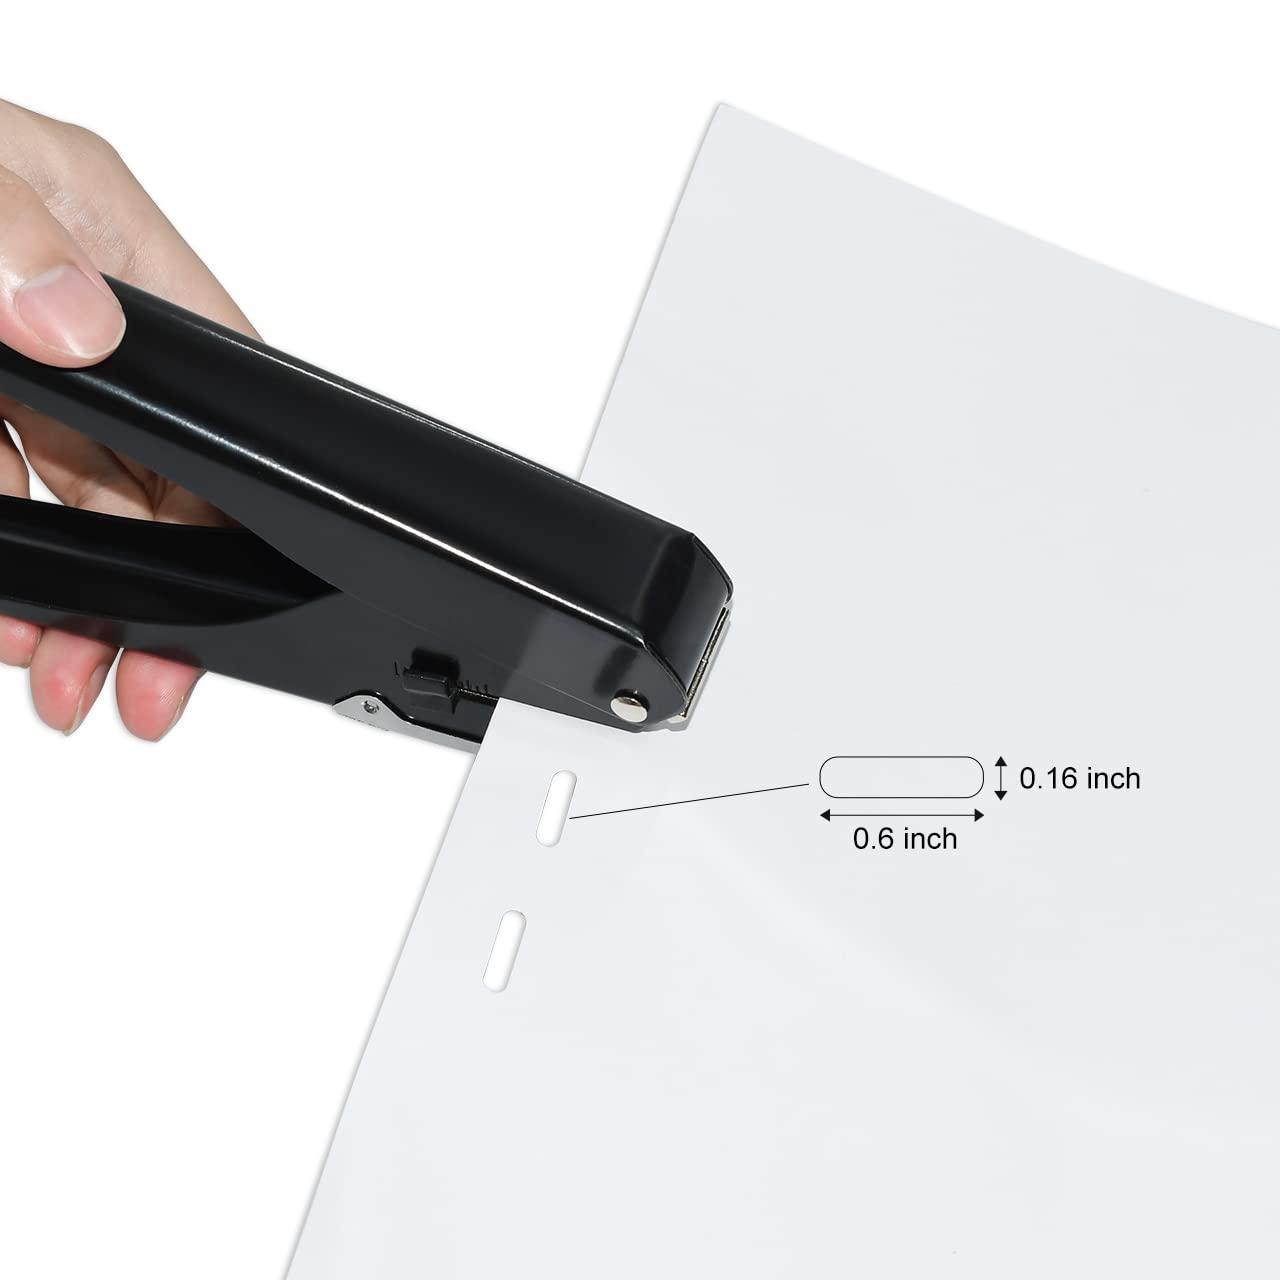 Heavy-Duty Elliptical Punch - Badge Hole Punch for ID Cards, PVC Slots, and  Paper